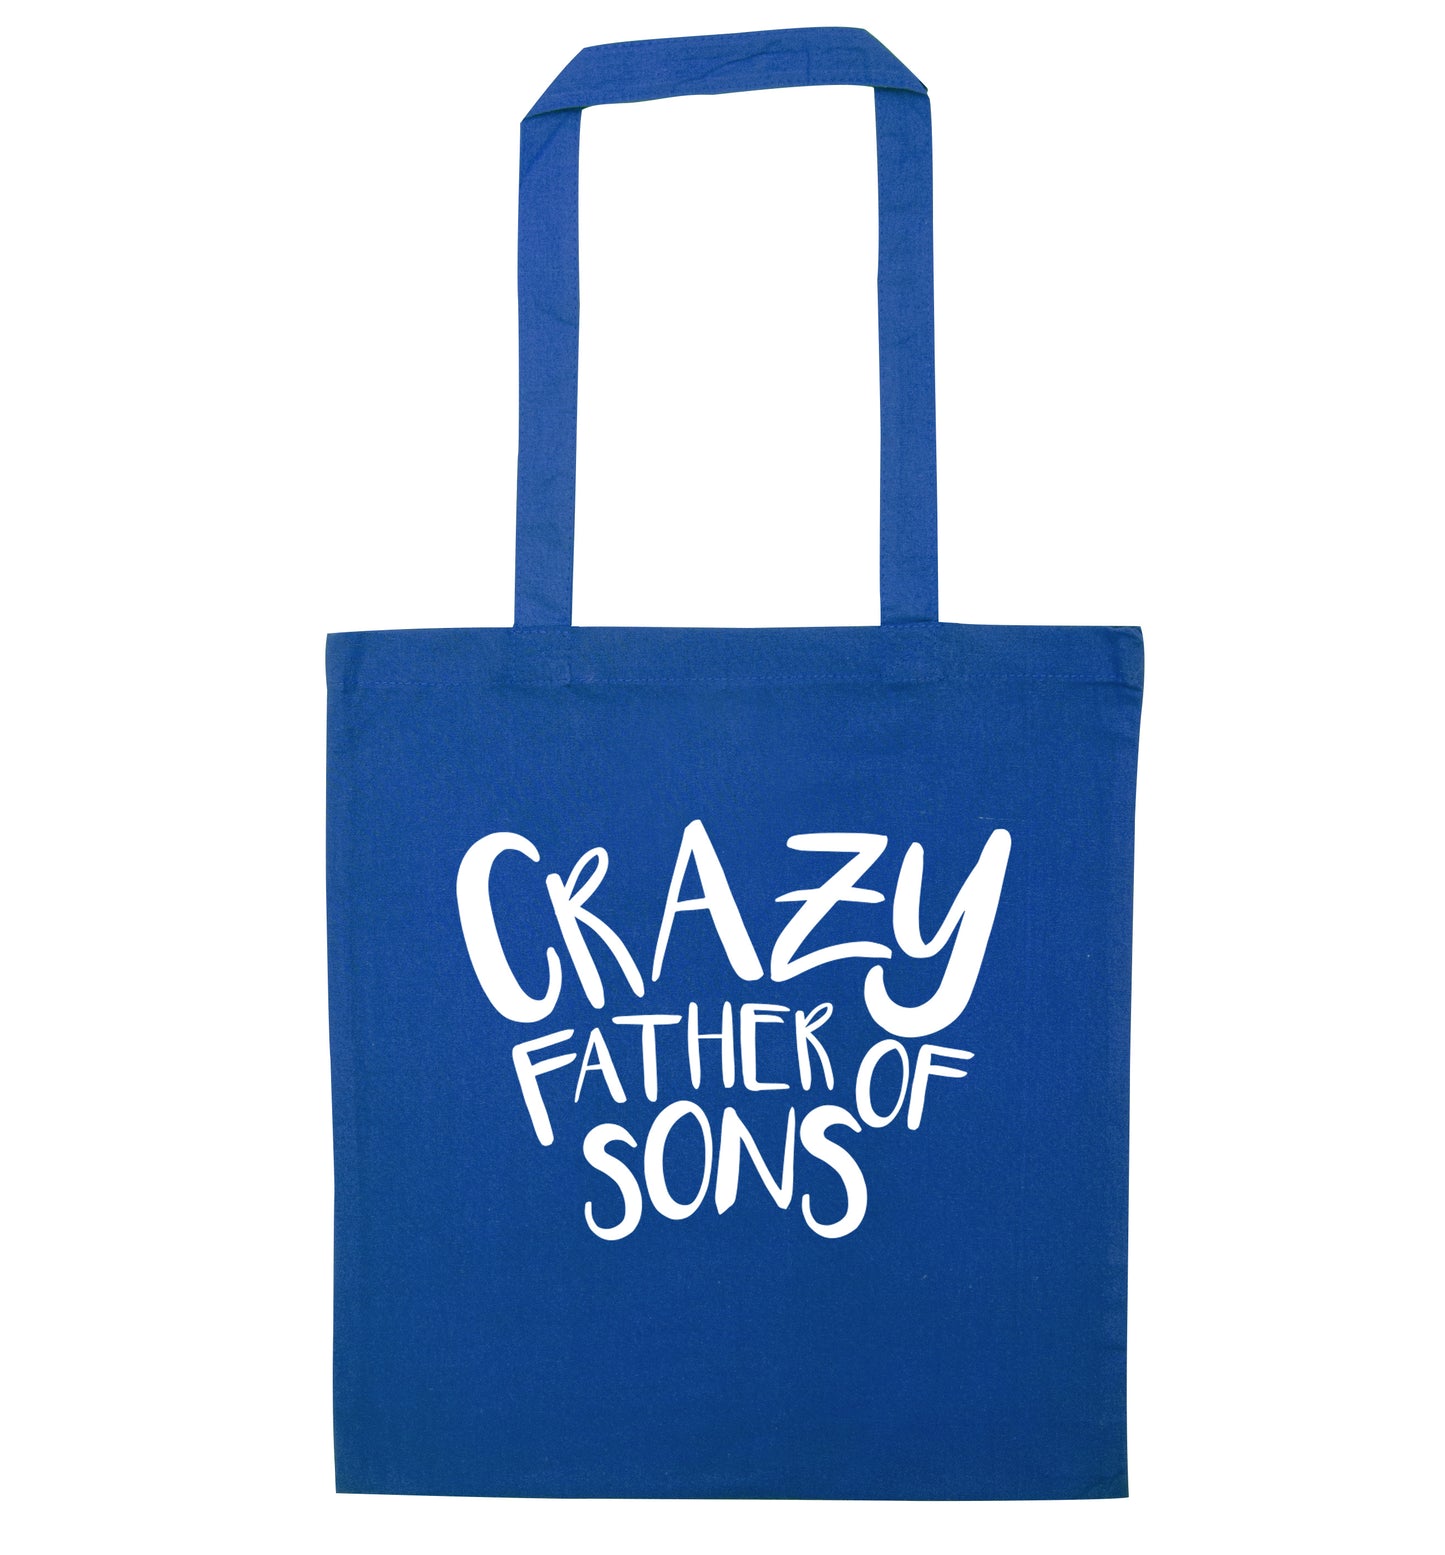 Crazy father of sons blue tote bag